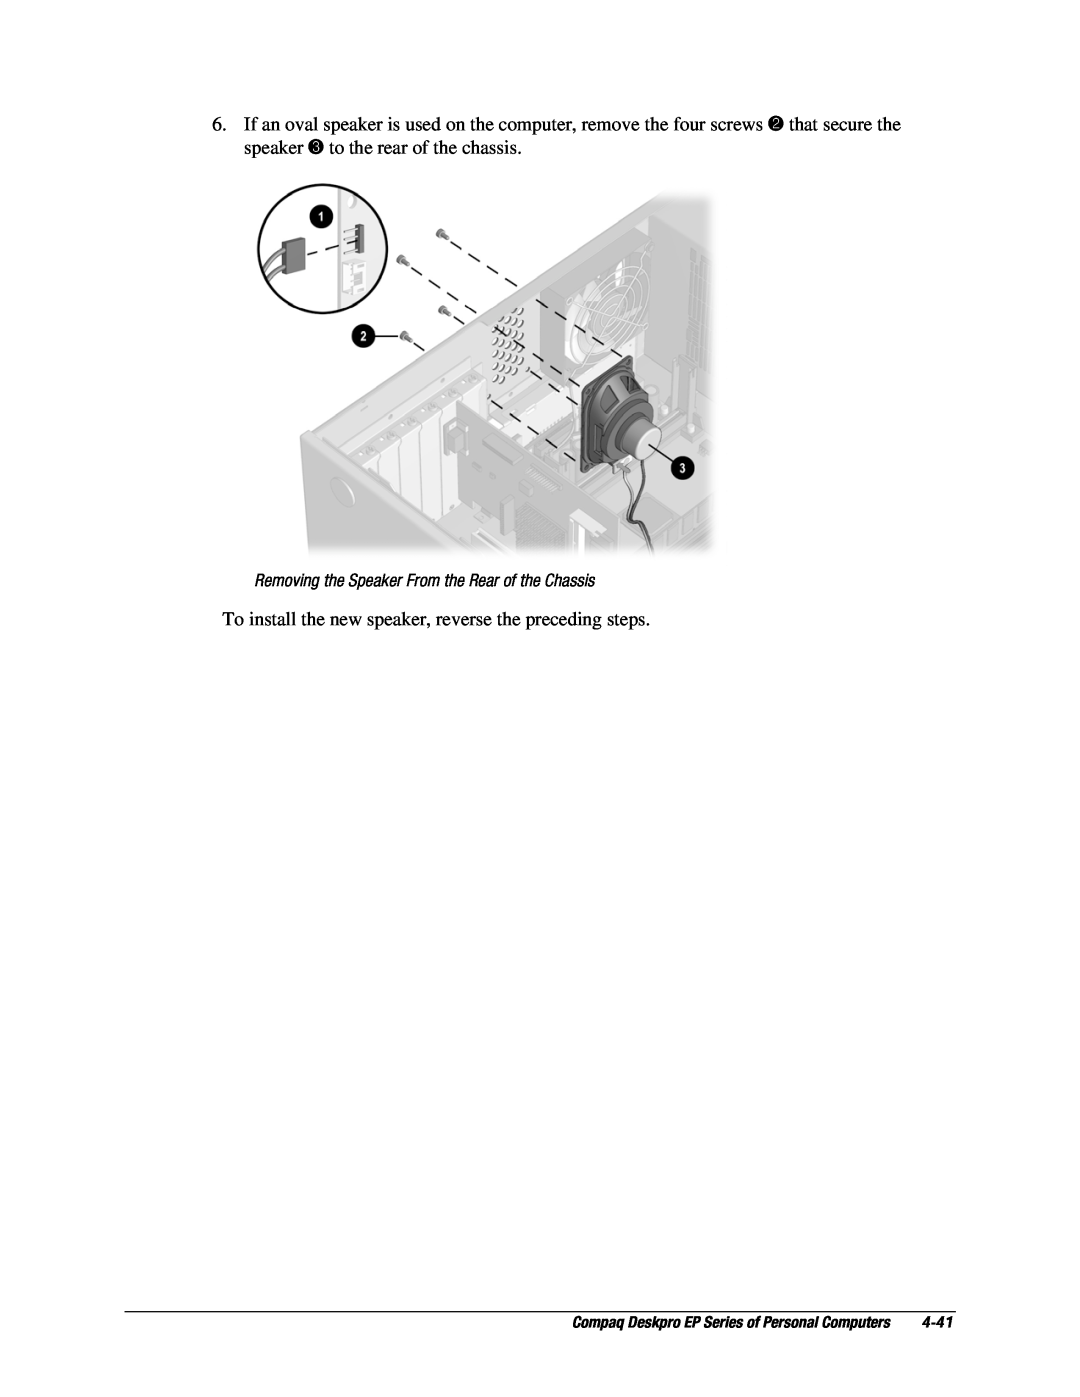 Compaq EP Series manual To install the new speaker, reverse the preceding steps, 4-41 